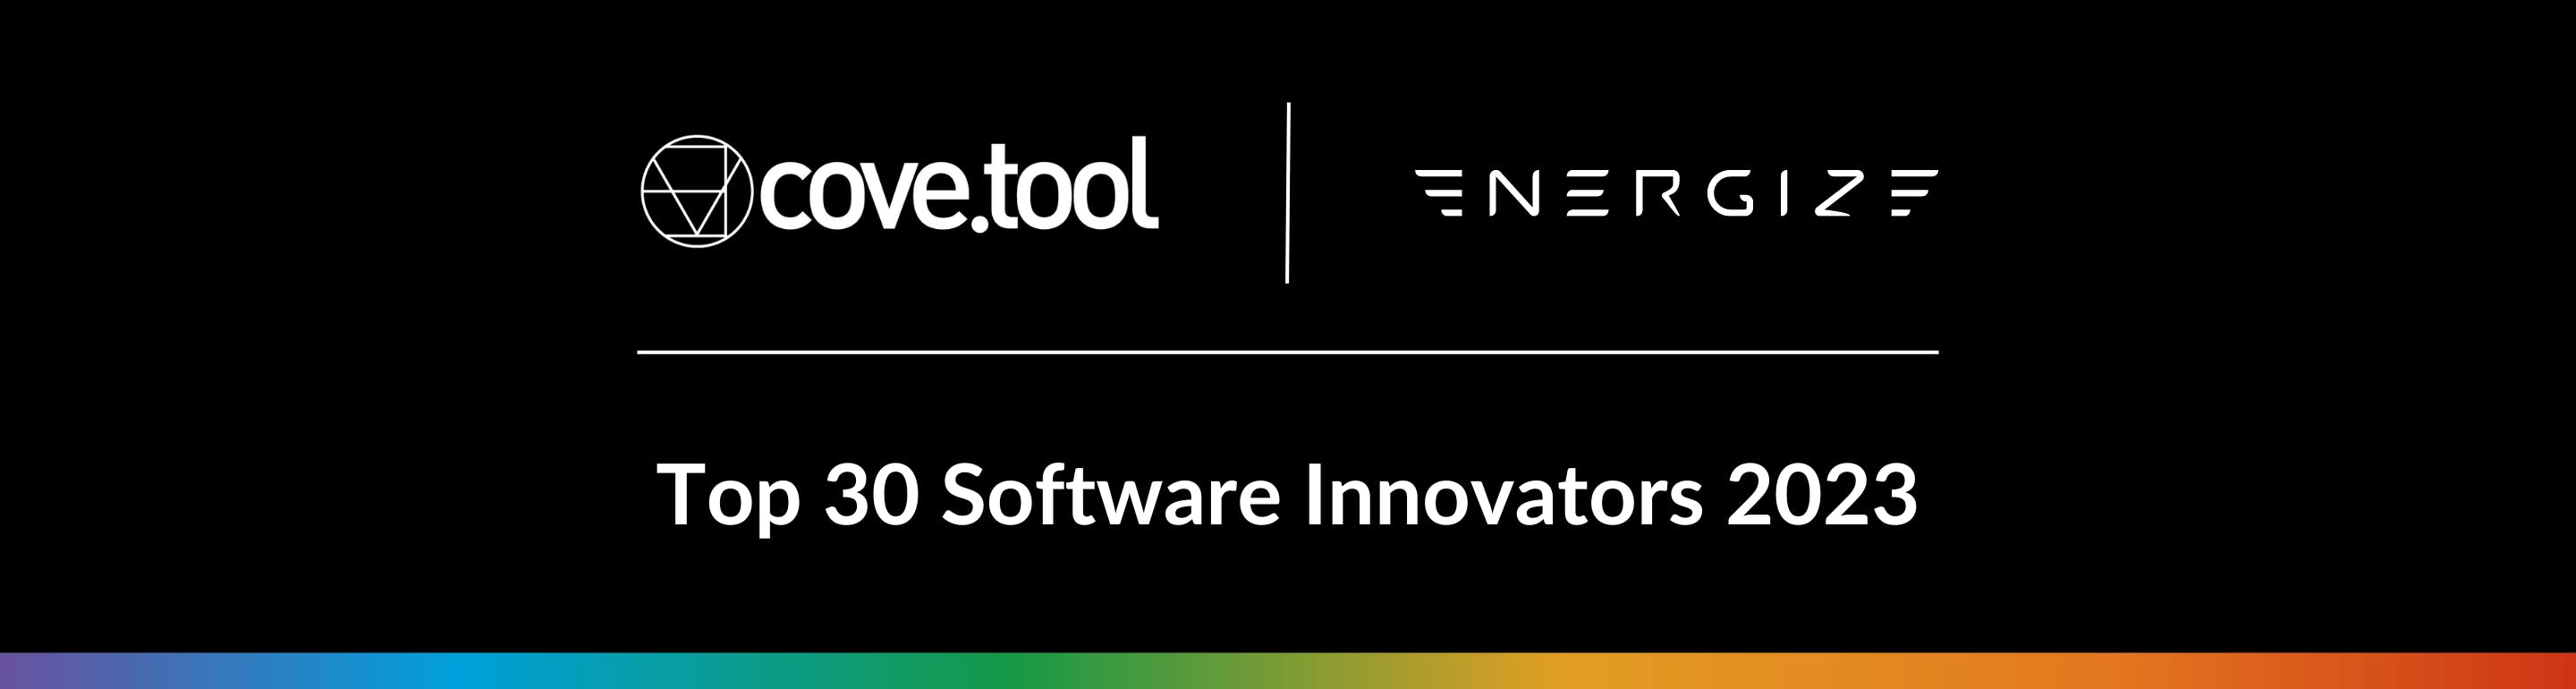 Energize ranks cove.tool as one of the Top 30 Software Innovators